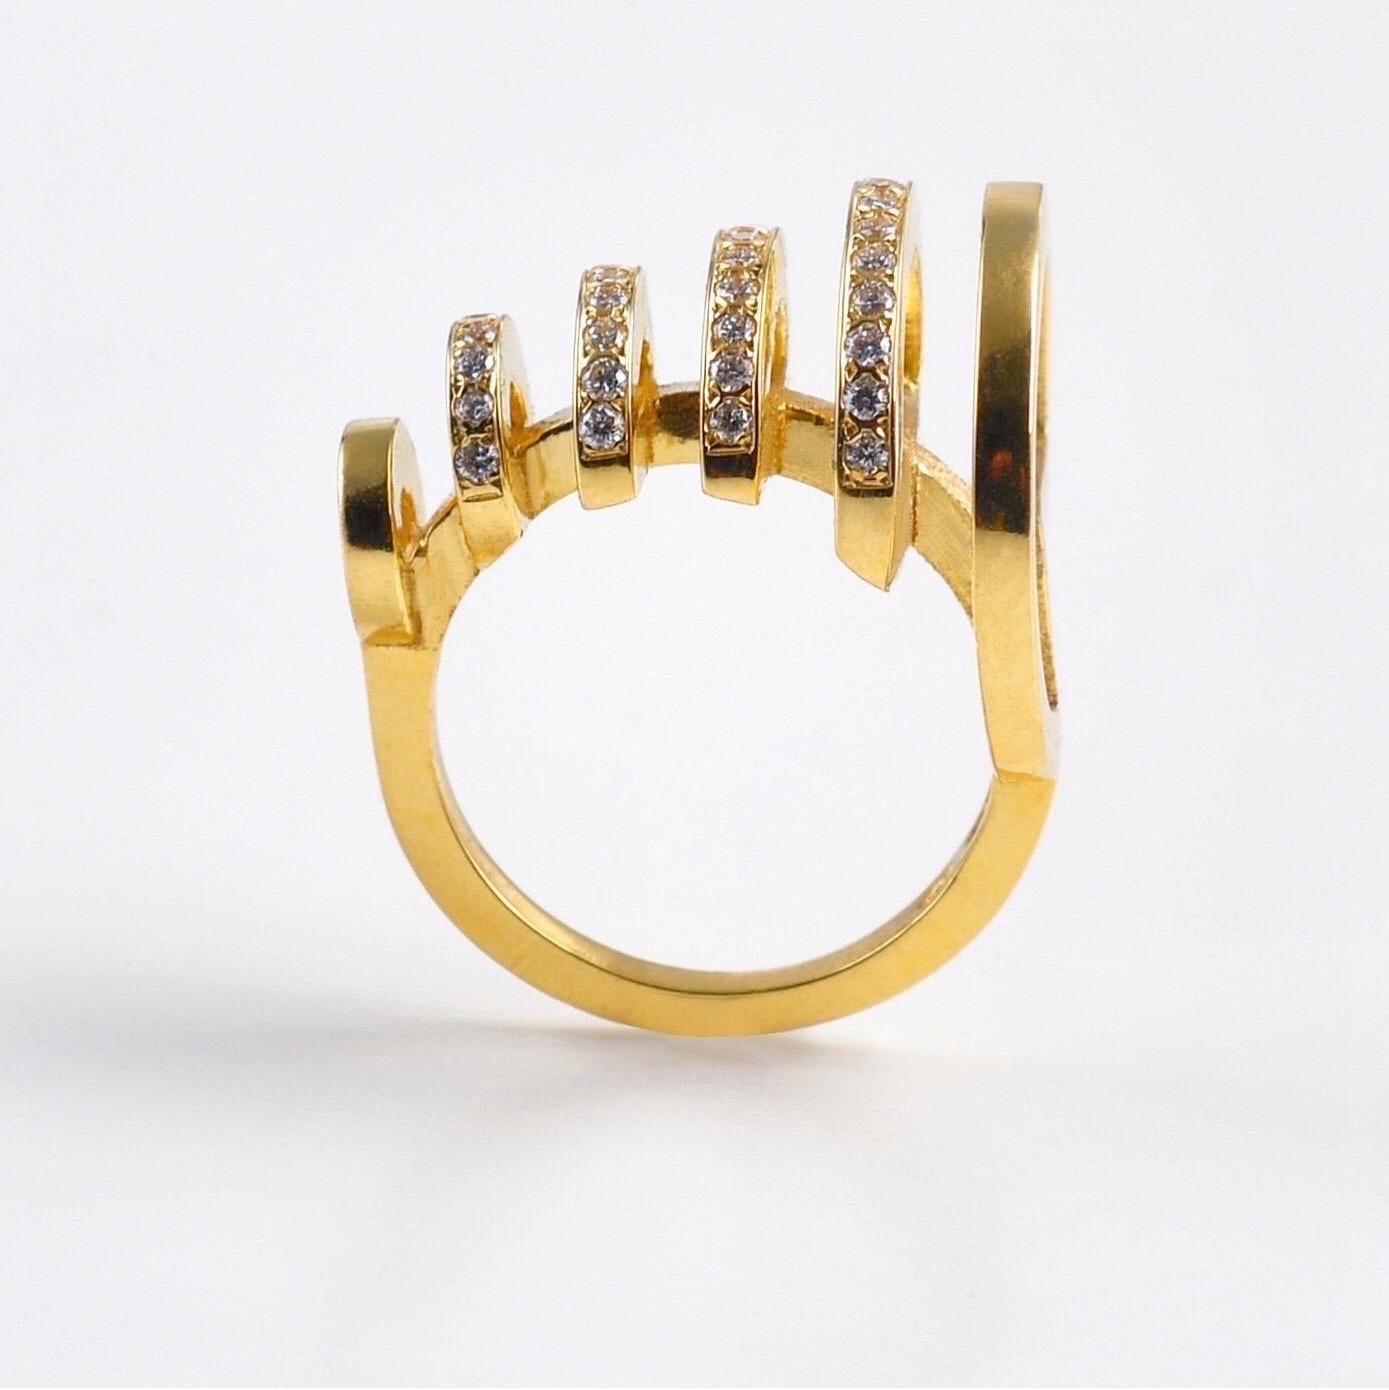 The 'Echo', ring is crafted in 18k gold, hallmarked in Cyprus. This stunning sculptural piece, comes in a highly polished finish and features white, VS Diamonds totaling 0.33 Cts. It will fit comfortably and would look great on a middle finger